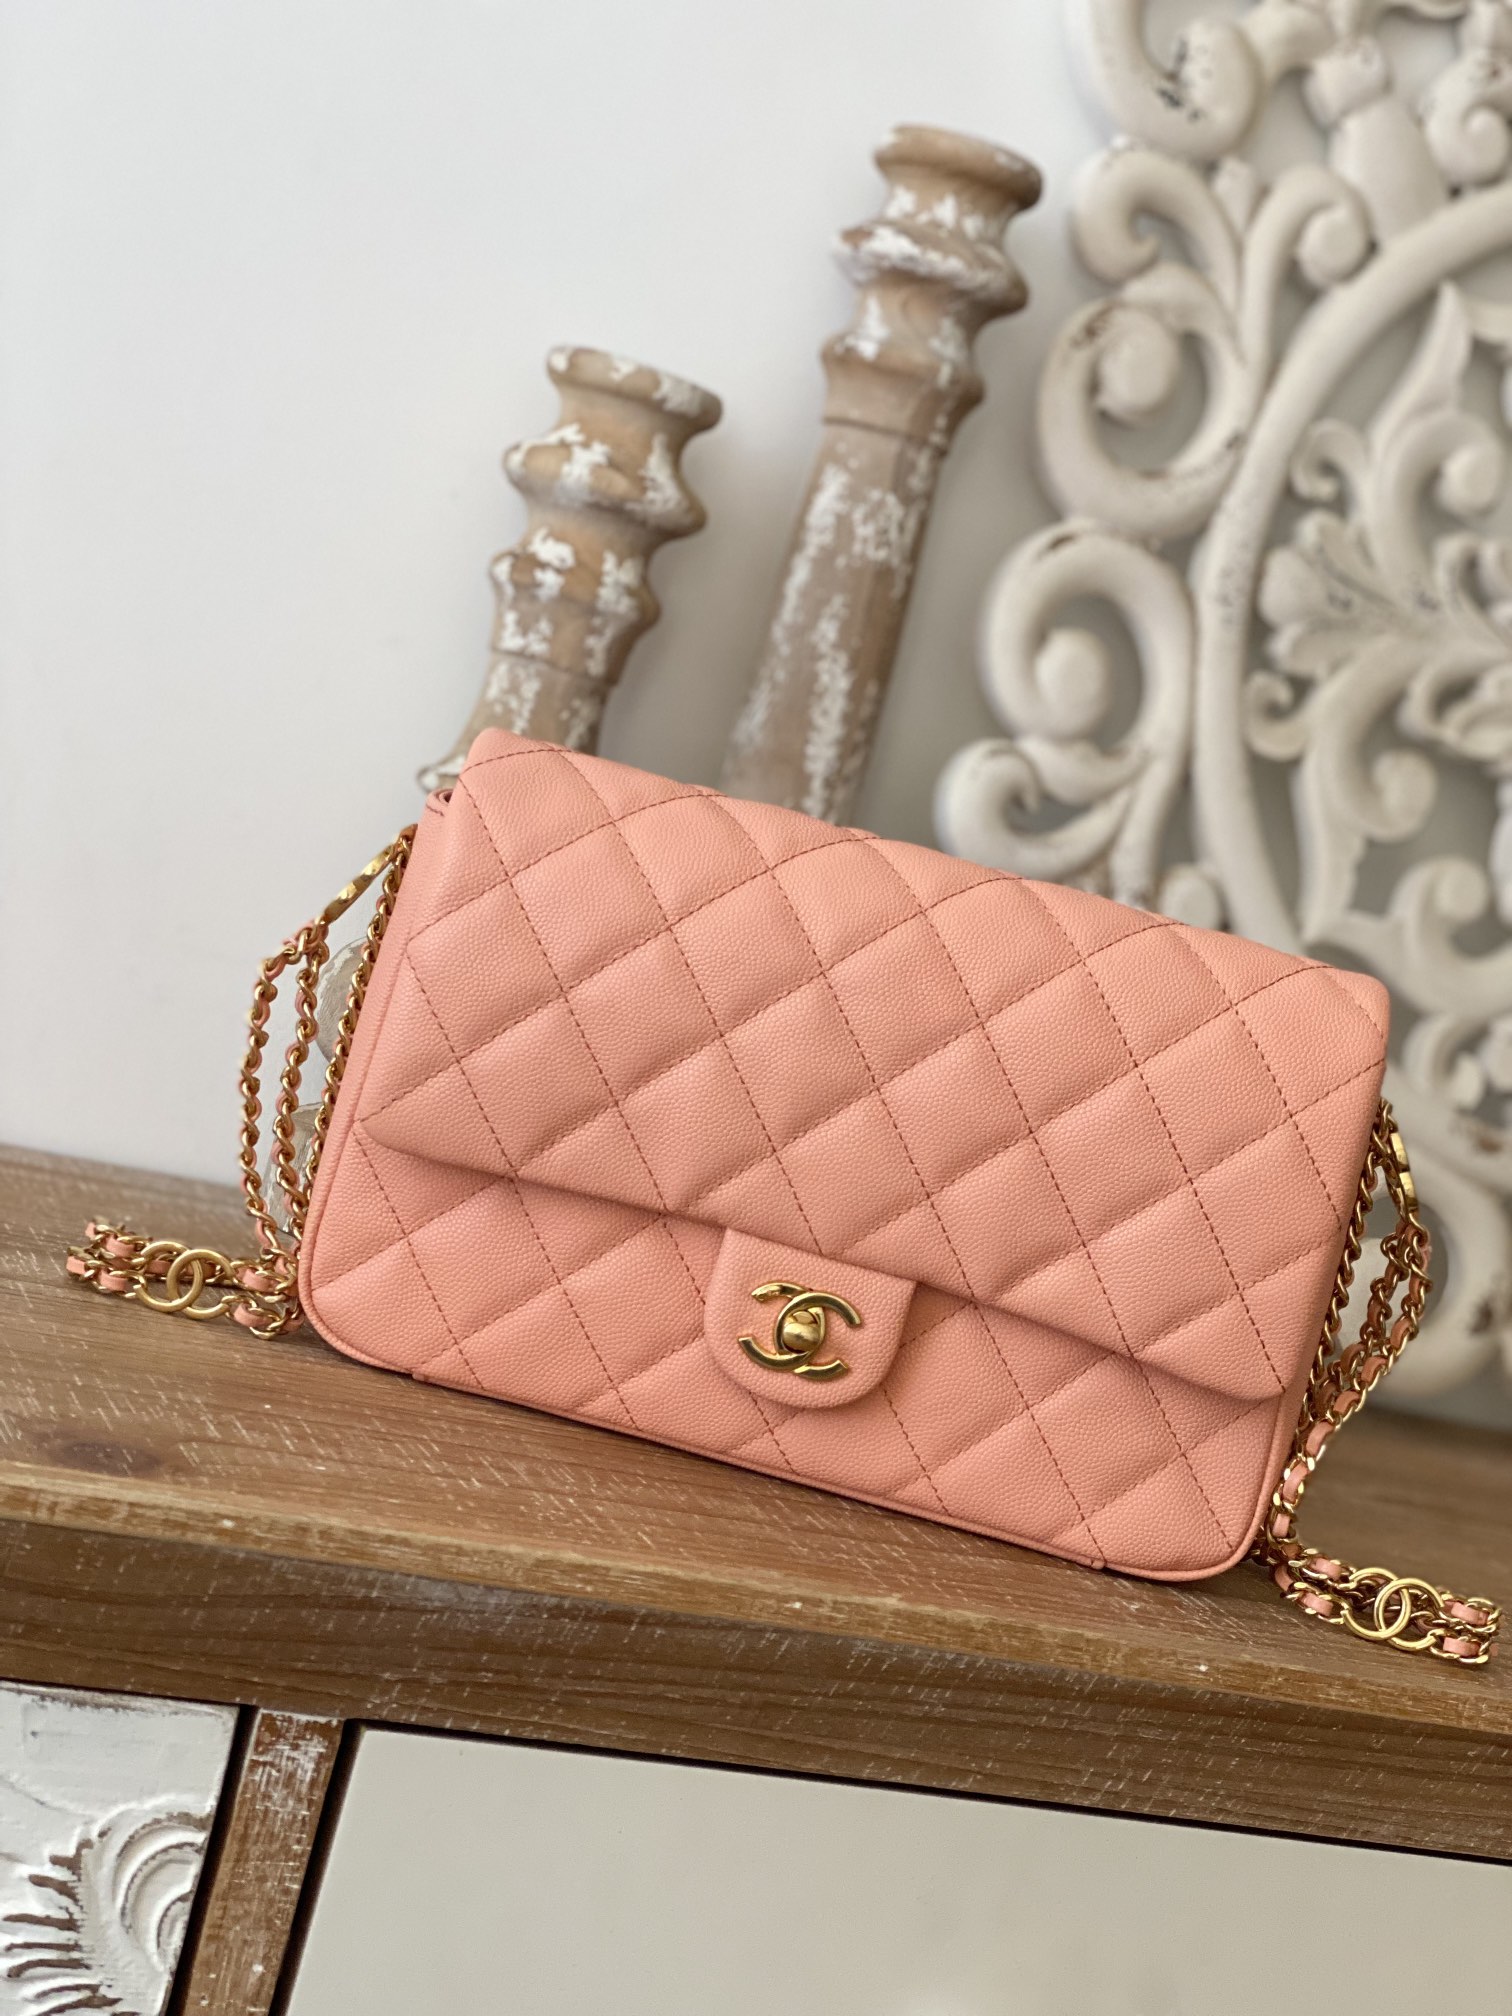 10 interesting facts about Chanel Bags  LDNFASHION